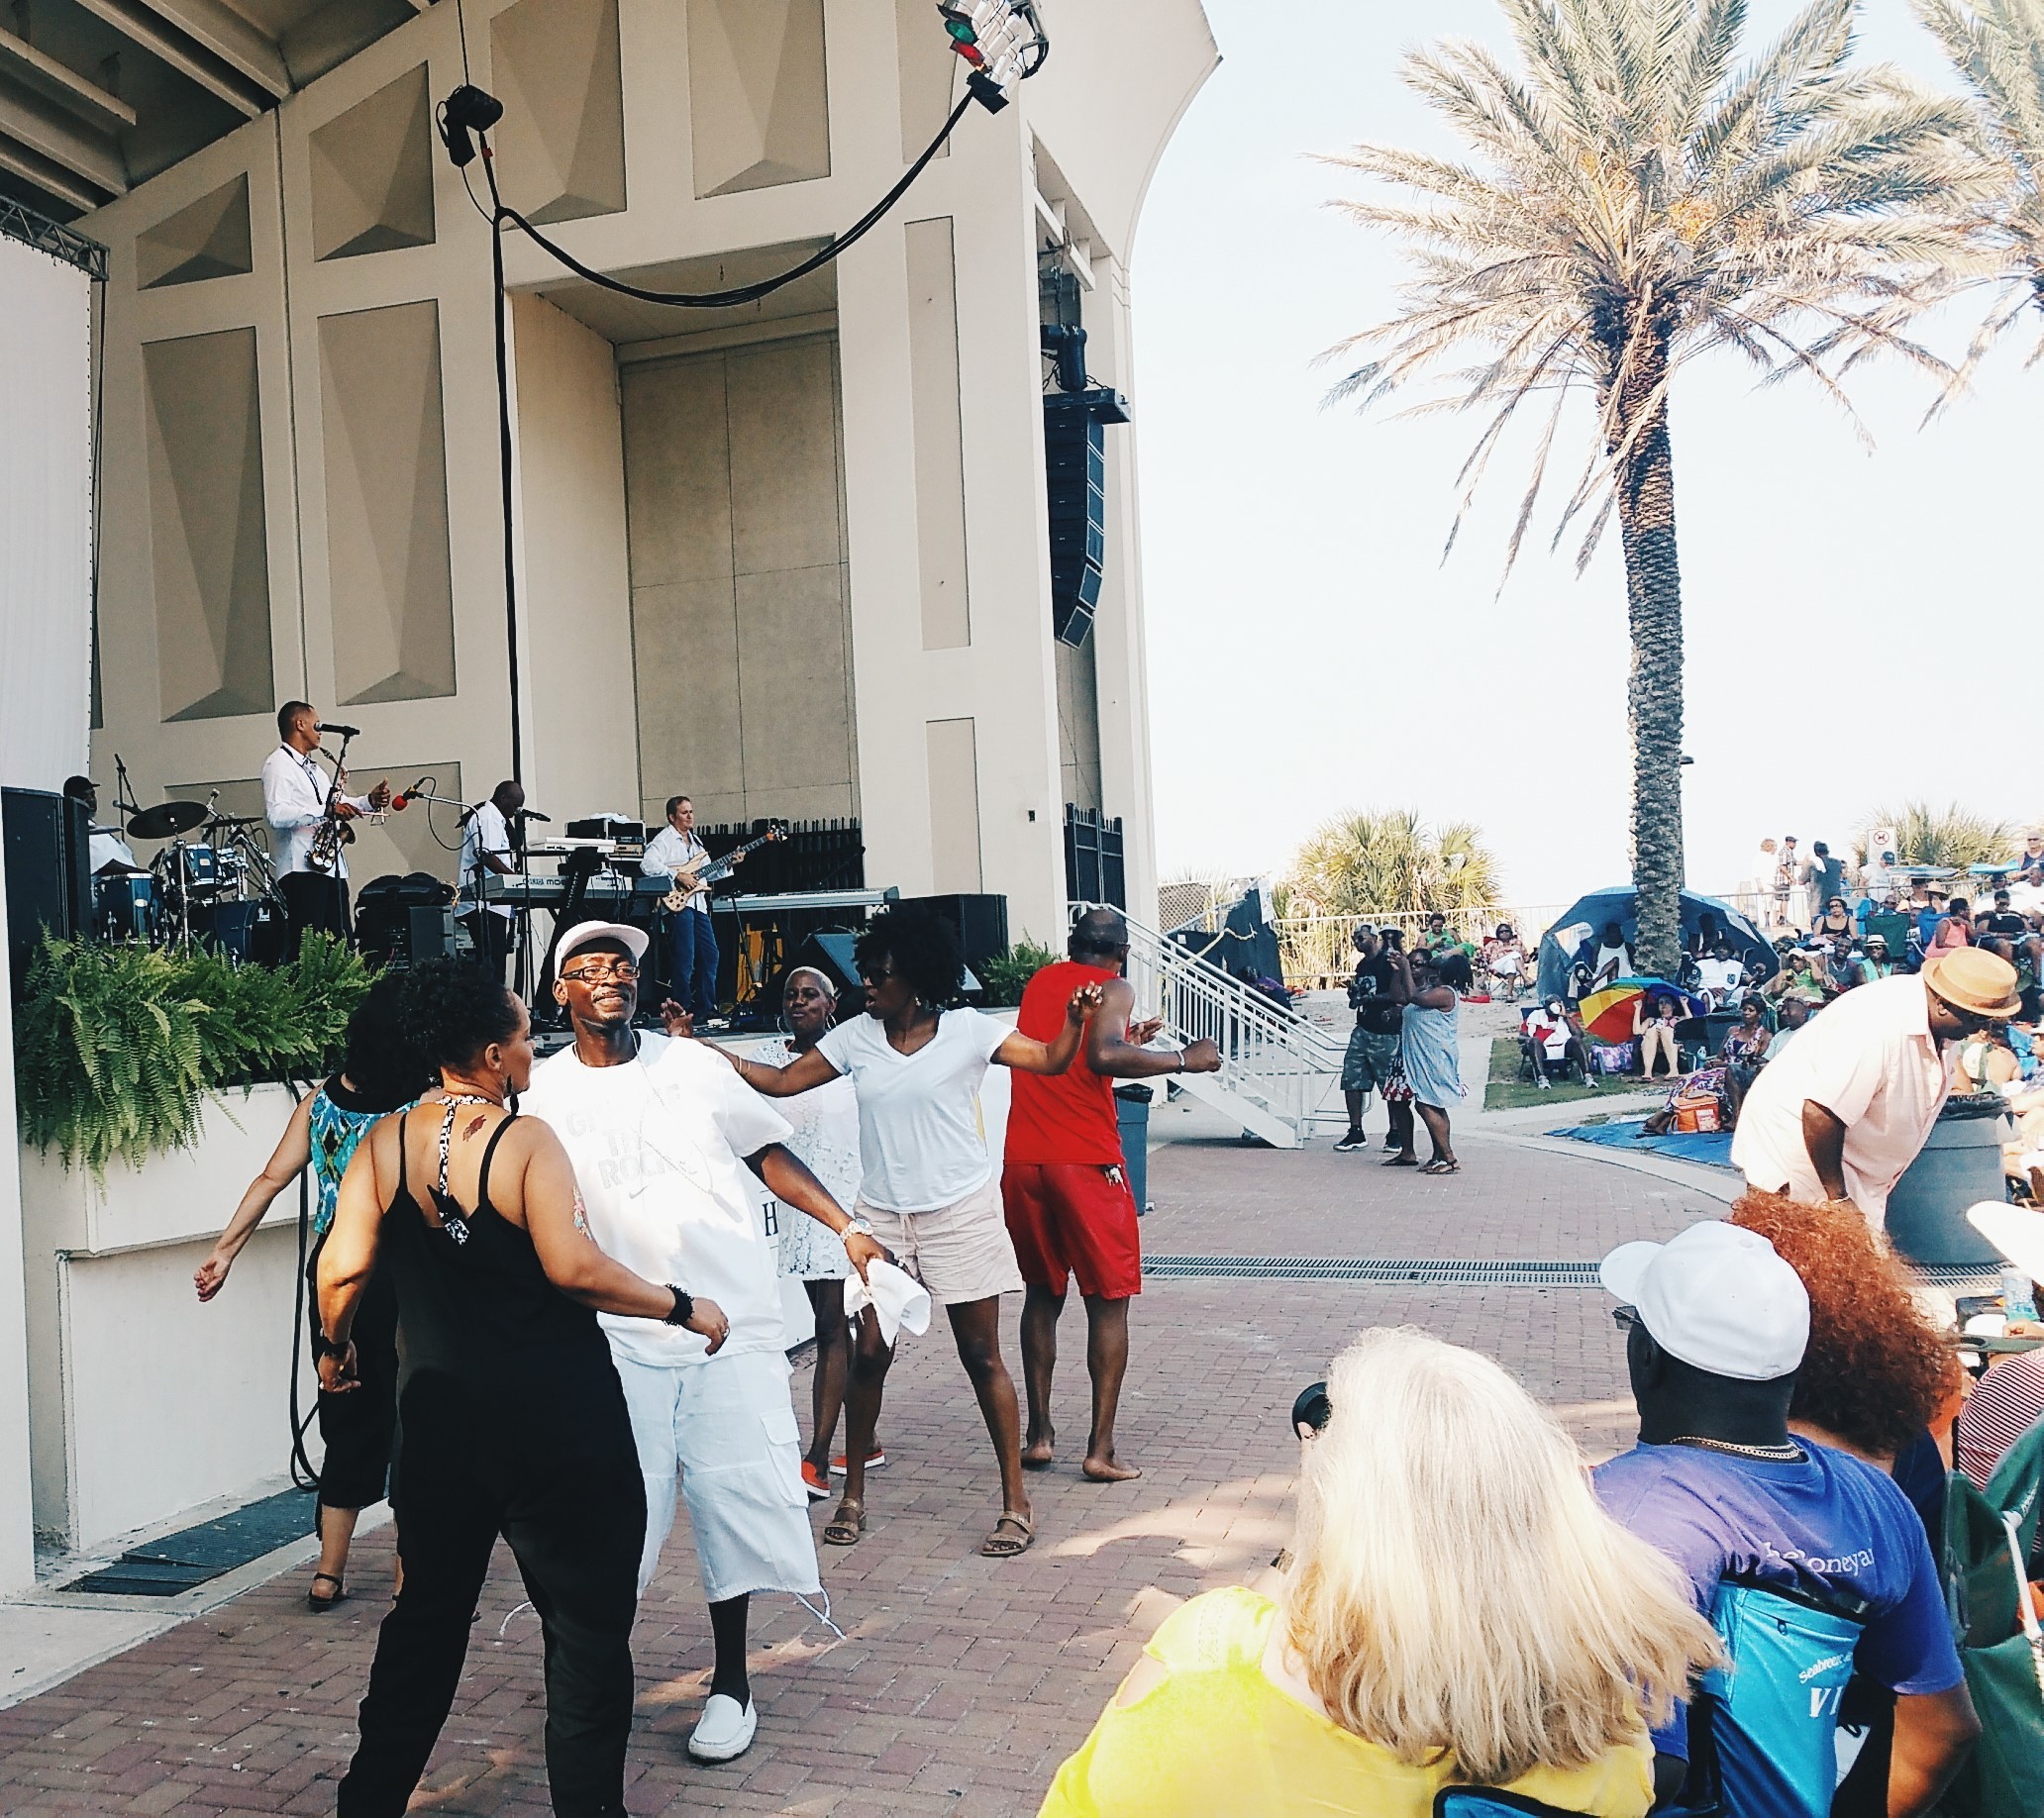 Jazz series guests dance as The Groov performs